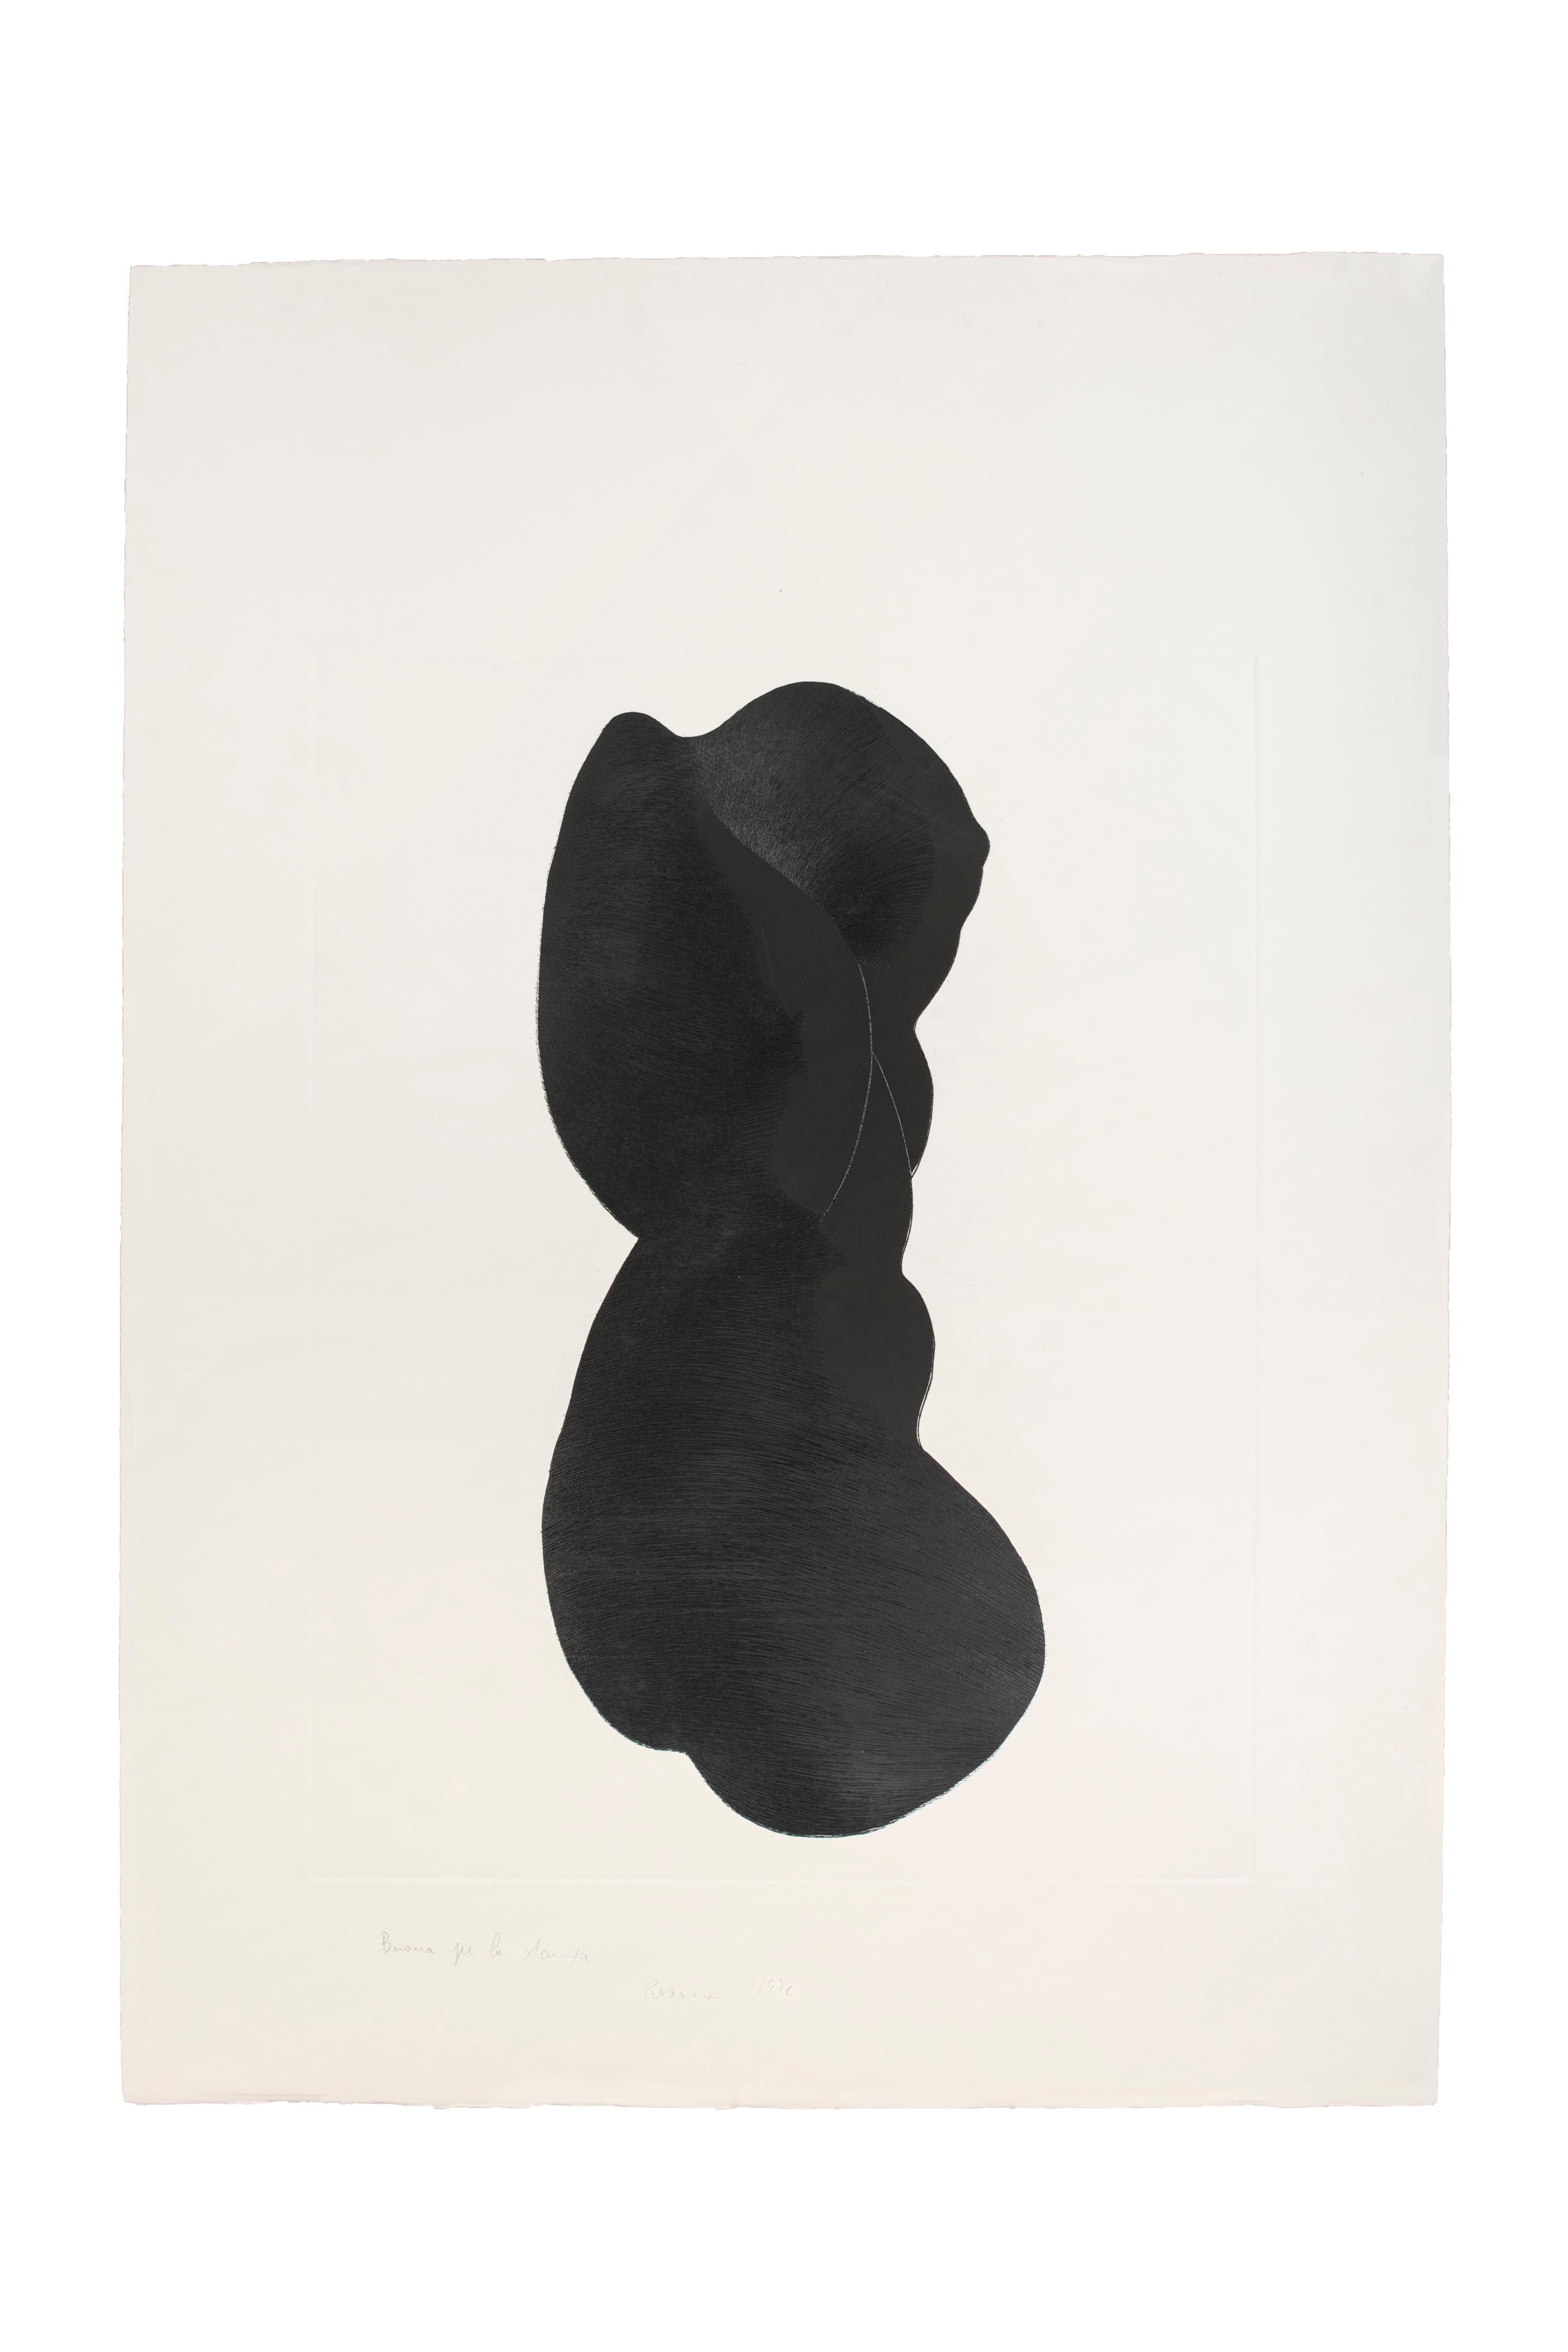 Image dimensions: 69 x 54 cm.

Silhouette V is an original etching on paper, realized by the Italian artist, Giacomo Porzano (Lerici, 1925 - Rome, 2006) in 1972.

Hand-signed and dated by the artist in pencil on the lower margin at the center.